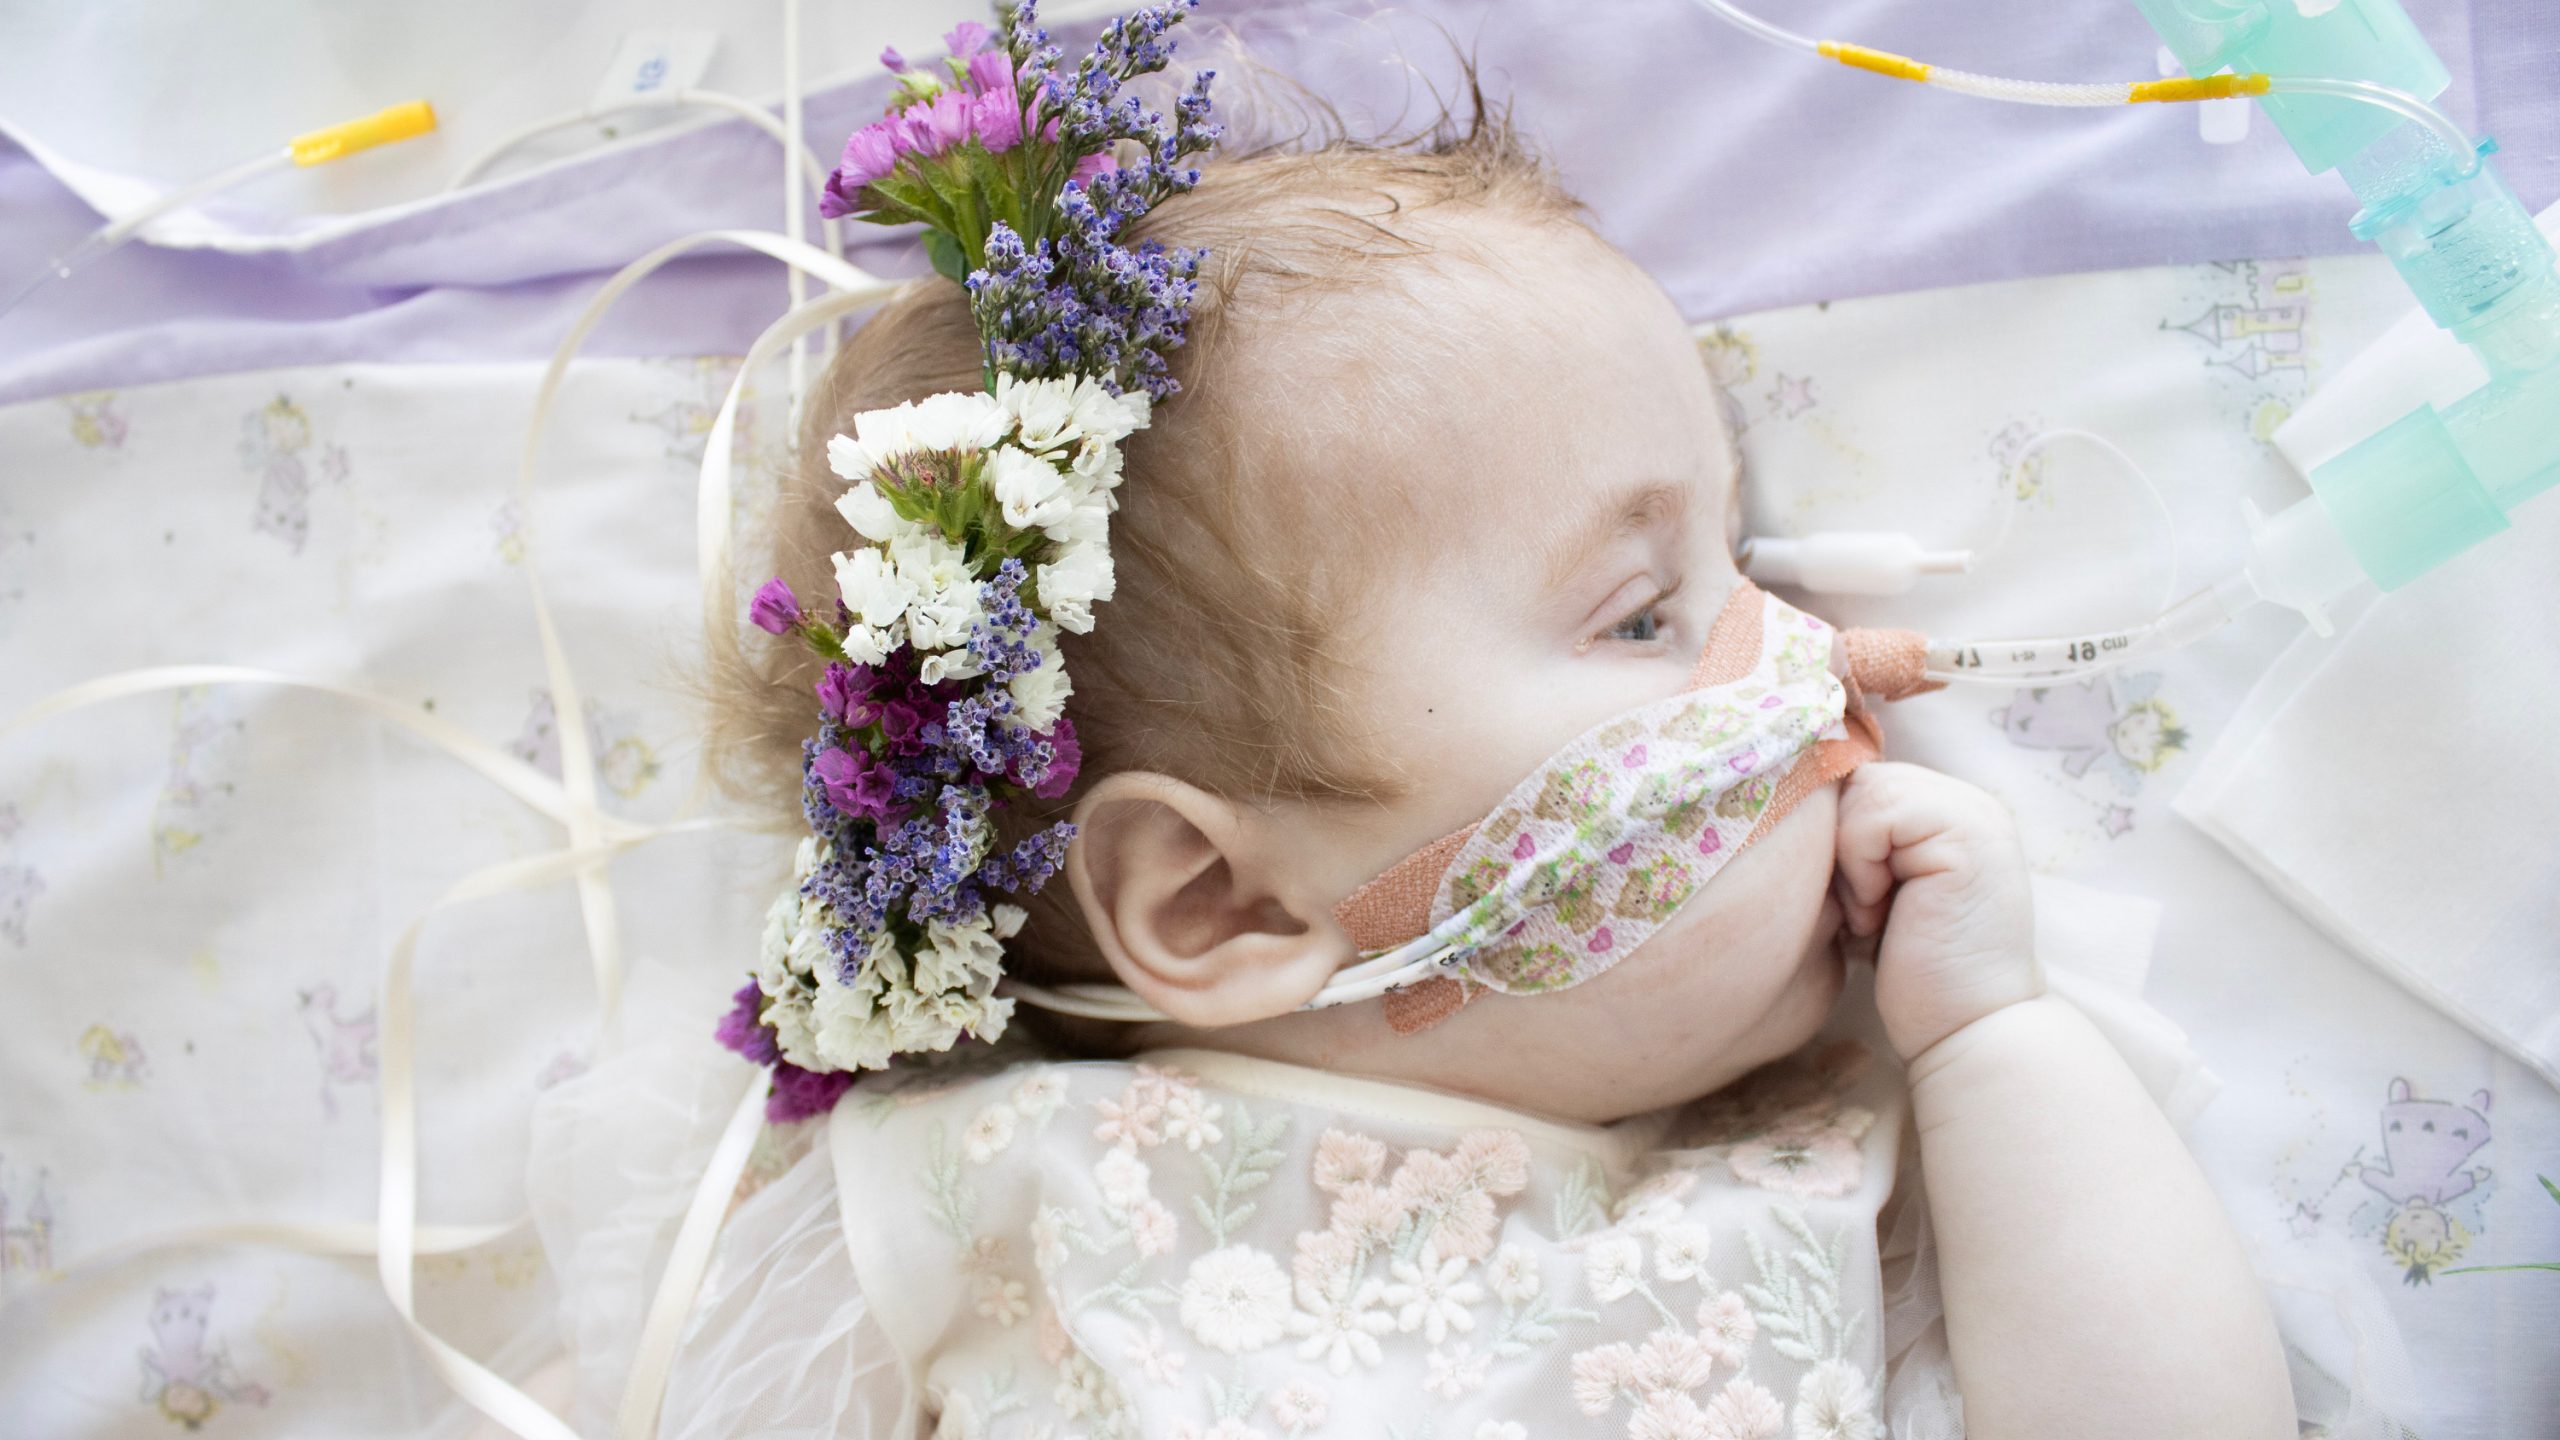 An image of a young baby in a bed. She wears a crown of purple flowers and looks to the side. Her hand is up to her mouth. She has a breathing tube taped to her face. The lilac bed sheets match the flowers in her hair.